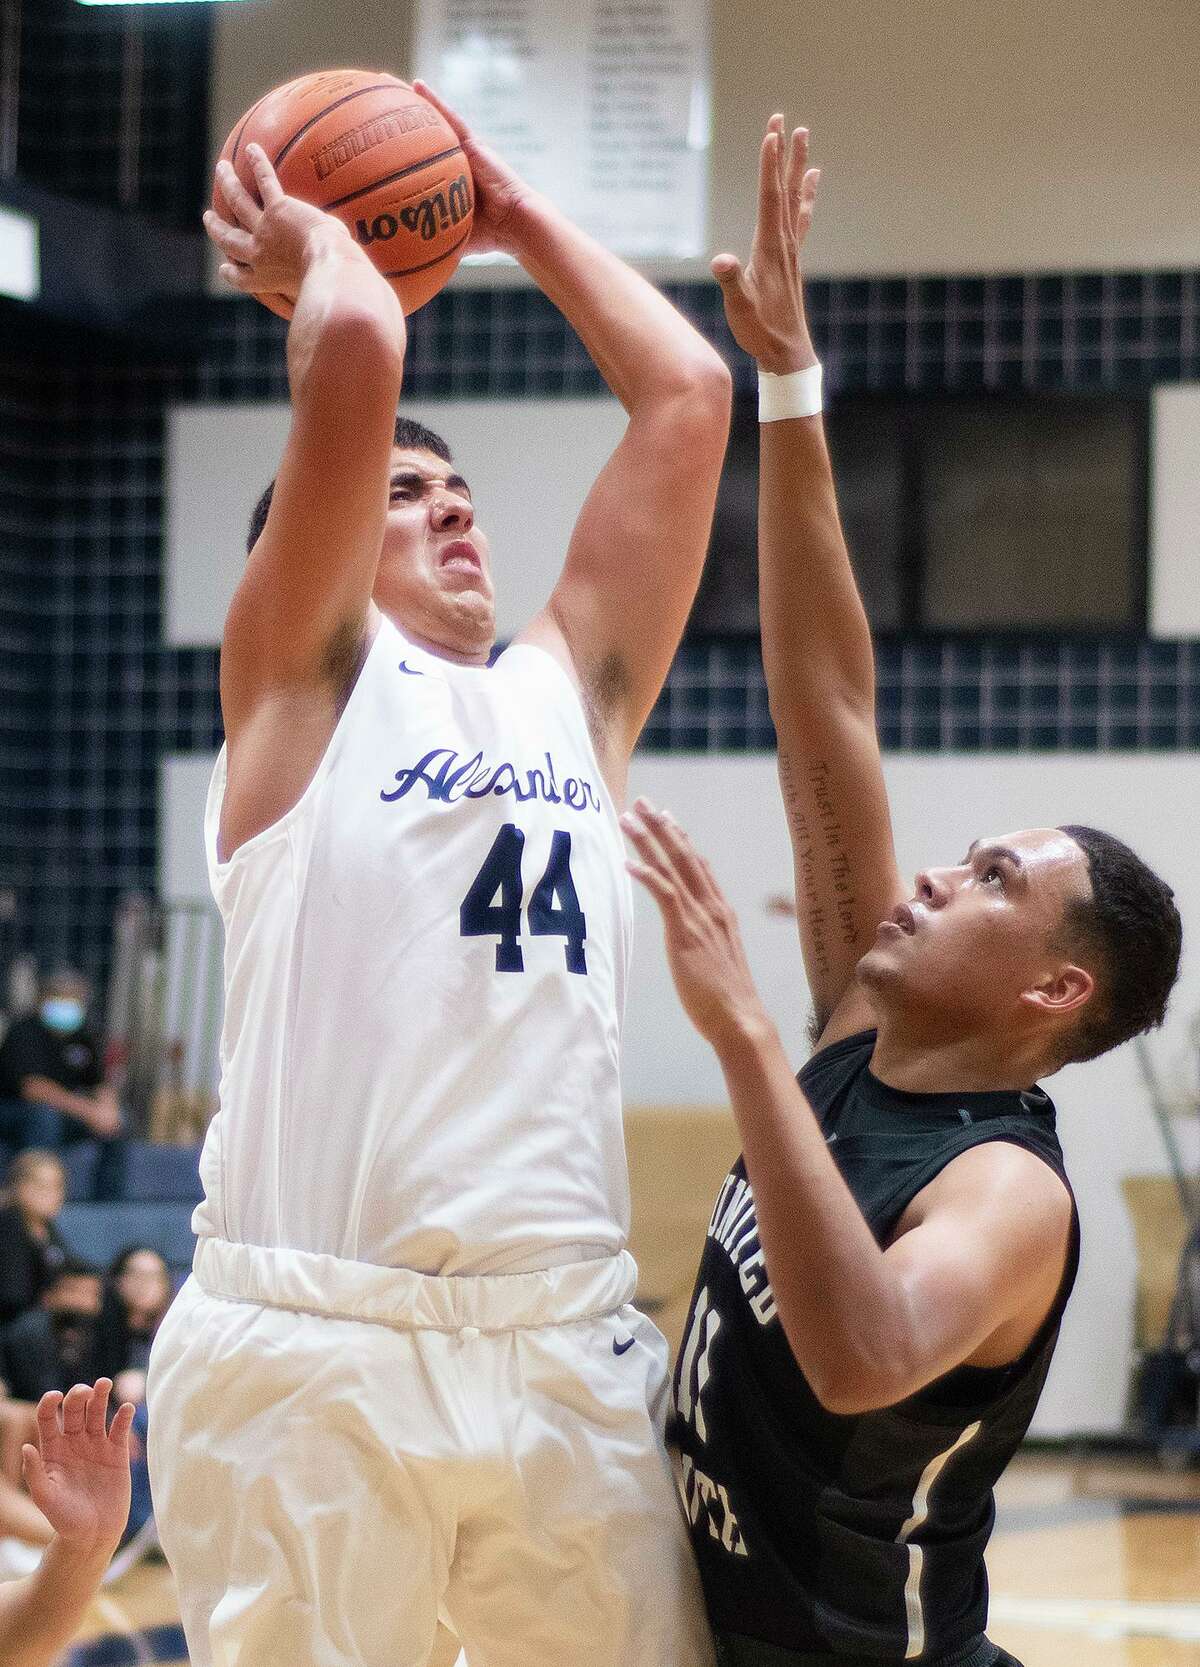 Alexander High School Lalo Uribe takes a jump shot as United South High School Oscar Medrano reaches for the block, Tuesday, Dec. 21, 2021, at Alexander High School.